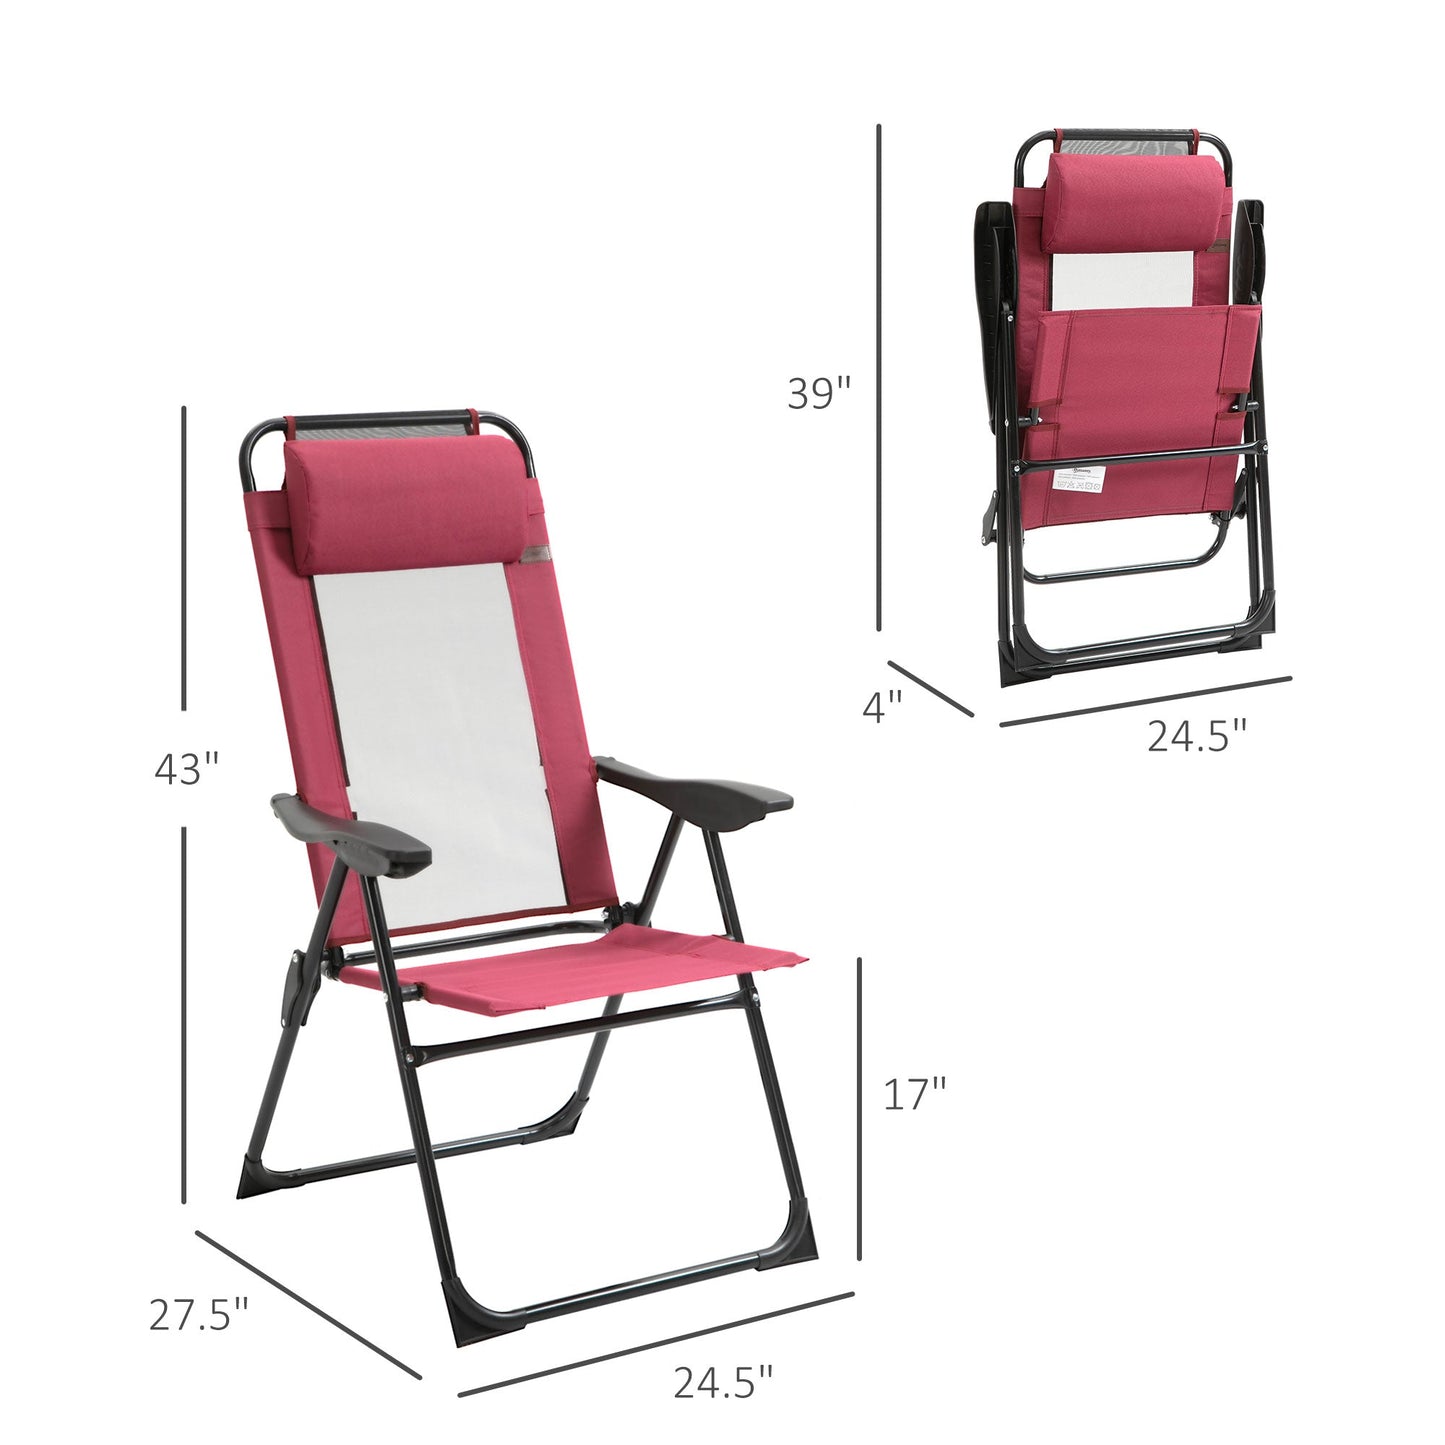 Outdoor and Garden-Set of 2 Portable Folding Recliner Outdoor Patio Chaise Lounge Chair with Adjustable Backrest, Red - Outdoor Style Company